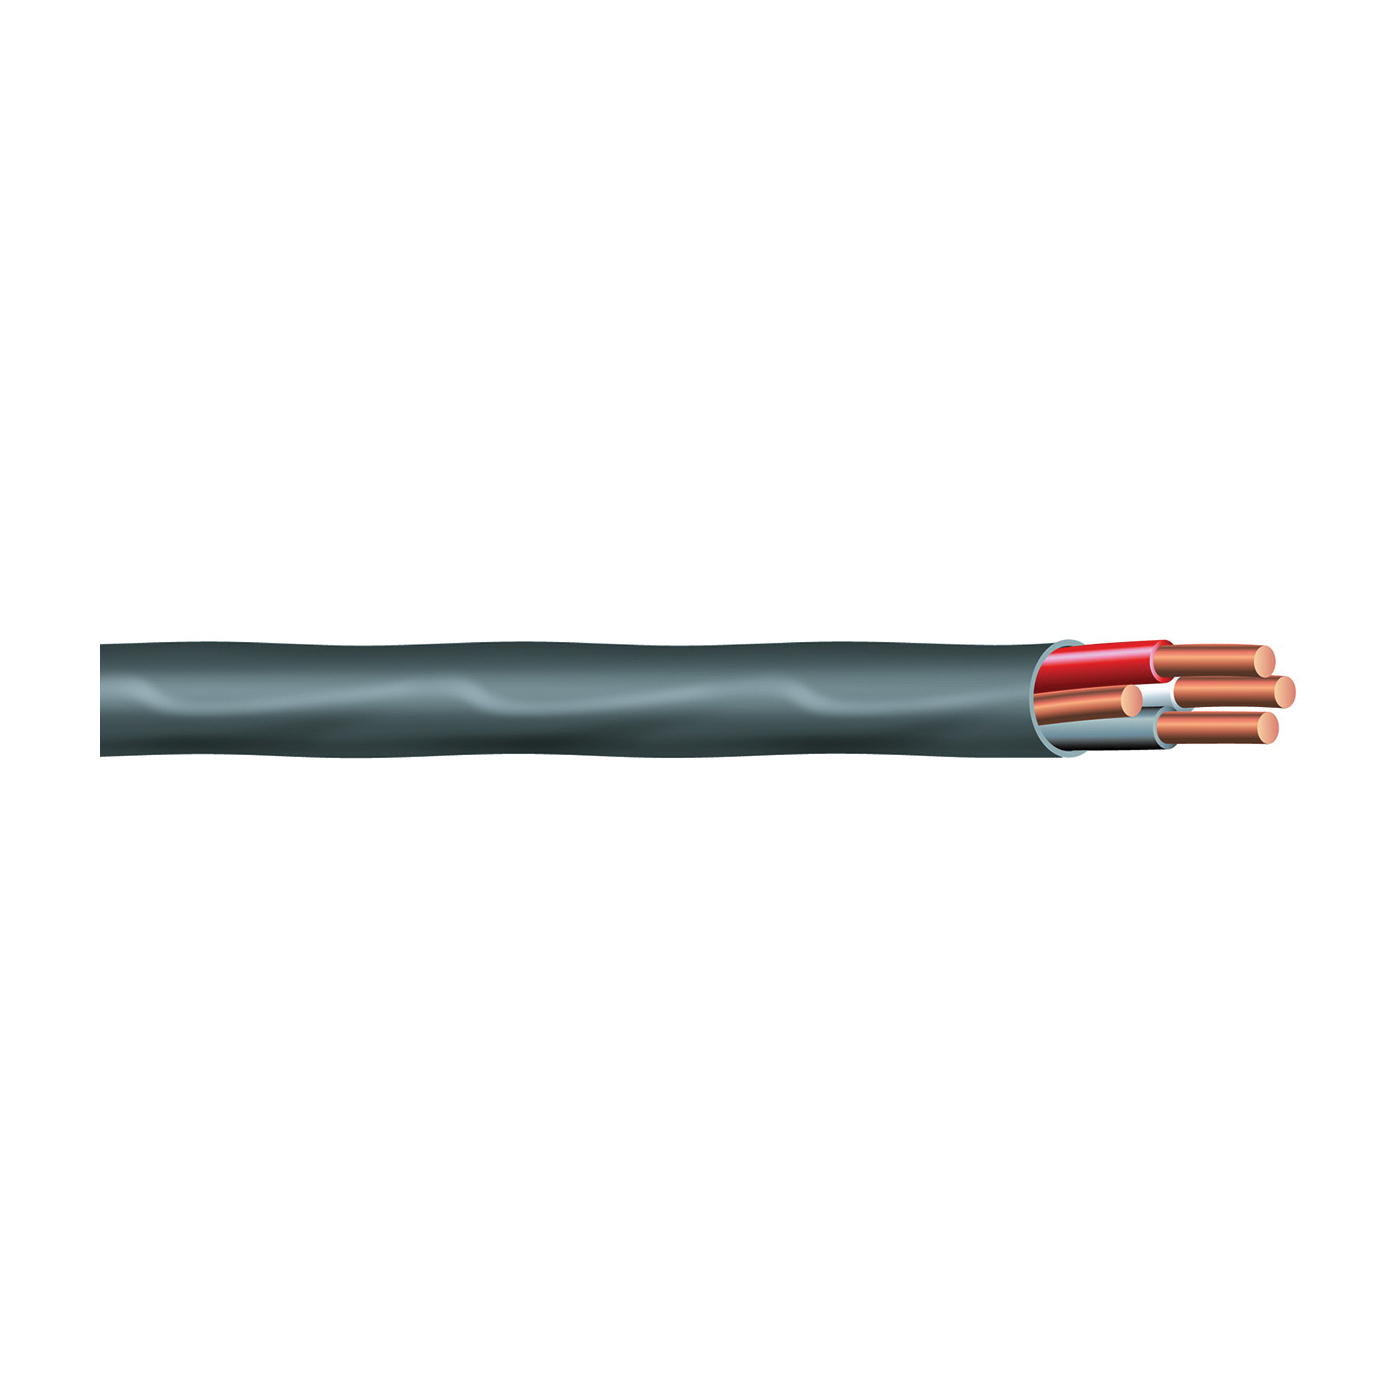 Southwire 63950032 Sheathed Cable, NM-B, 6 AWG Wire, 3 -Conductor, 50 ft L, Copper Conductor, PVC Insulation